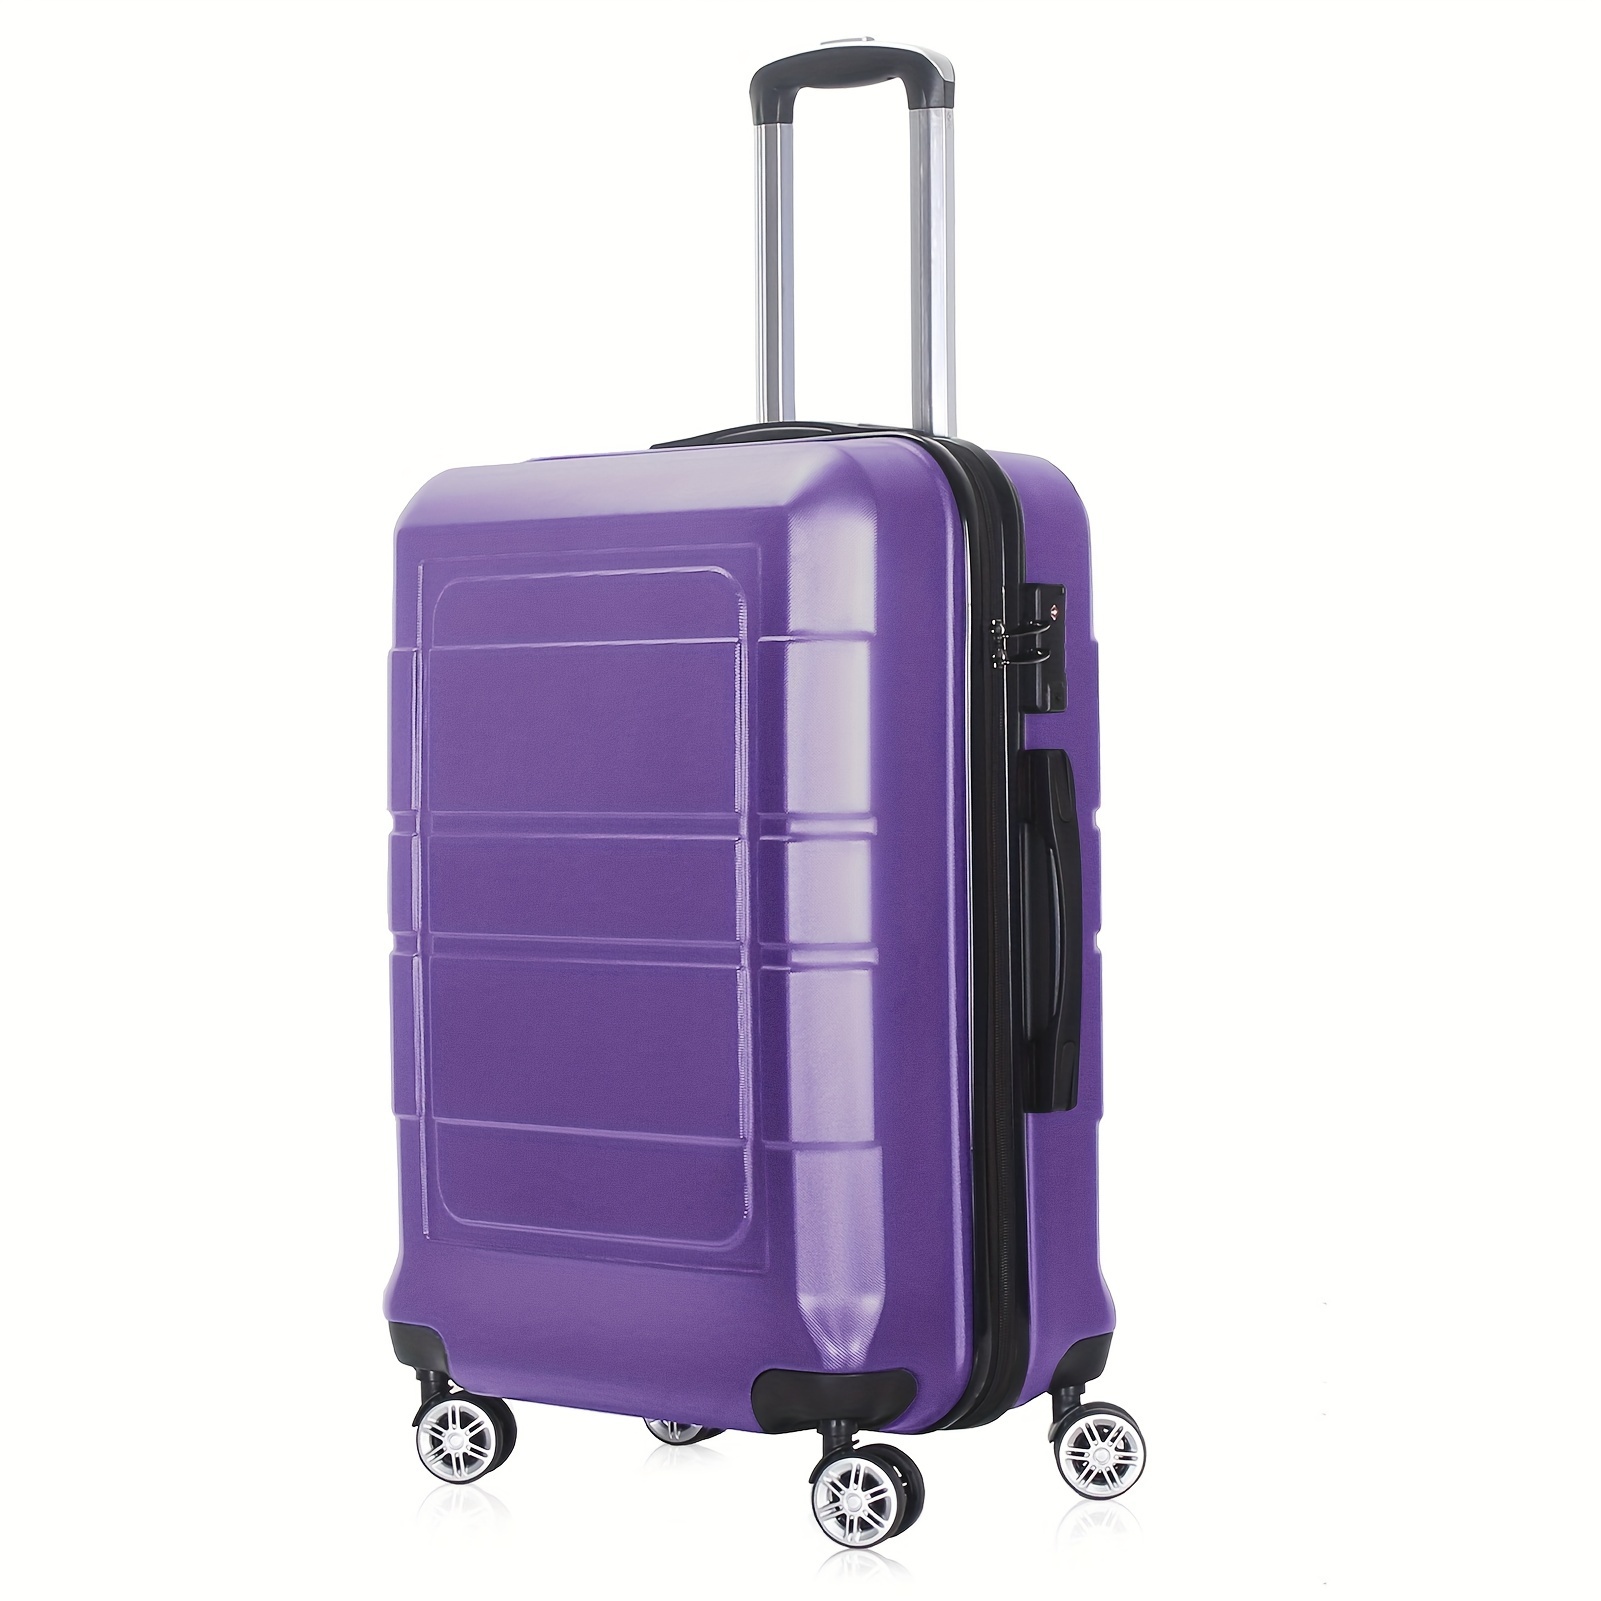 

Hardside Carry On Luggage With Spinner Wheels And Built-in Tsa Lock, Durable Suitcase Rolling Luggage, Carry-on 20-inch